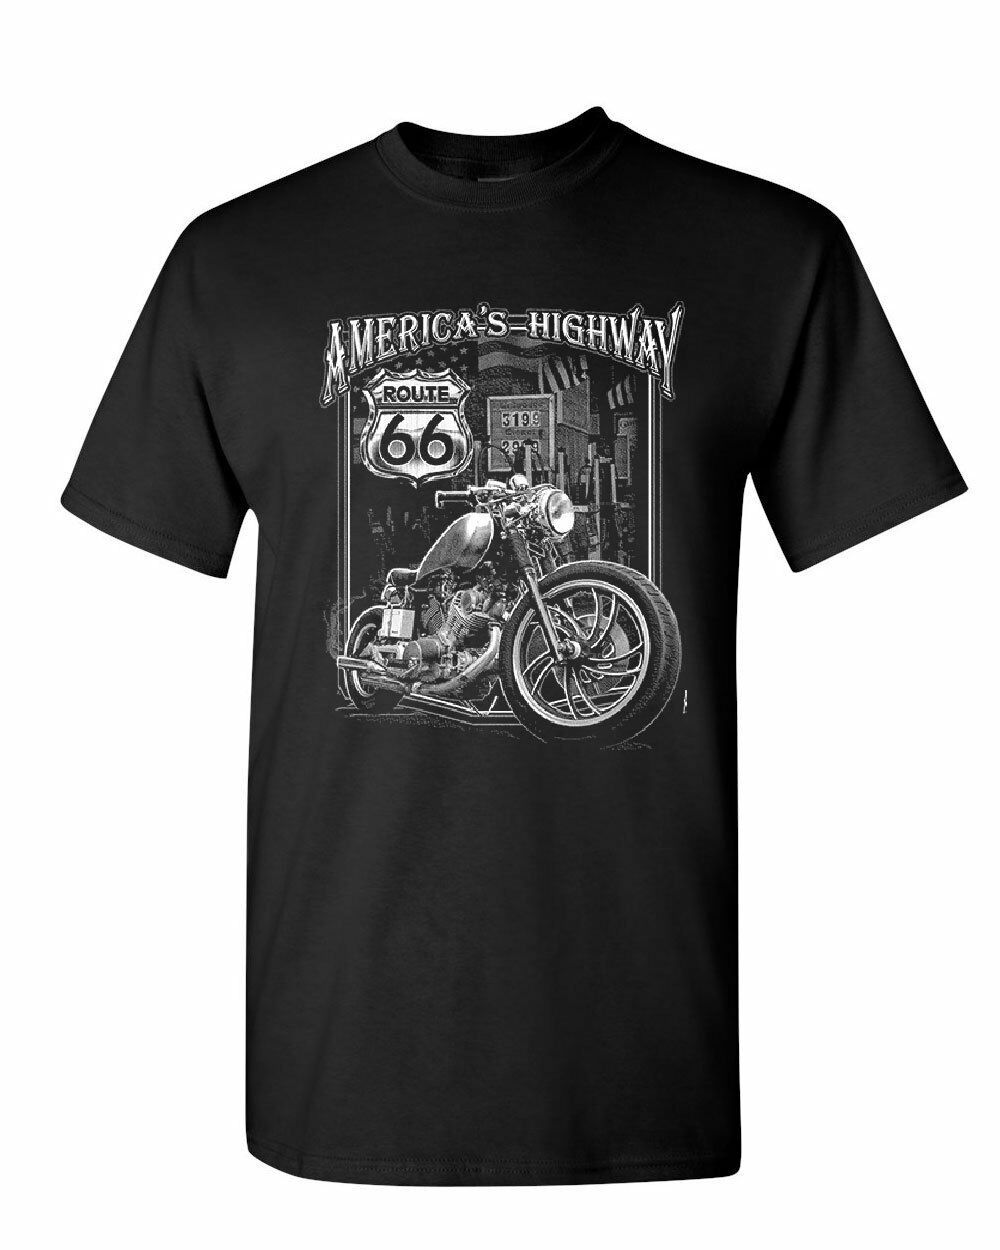 America's Highway T-Shirt Route 66 MC Motorcycle Chopper Bobber Mens ...